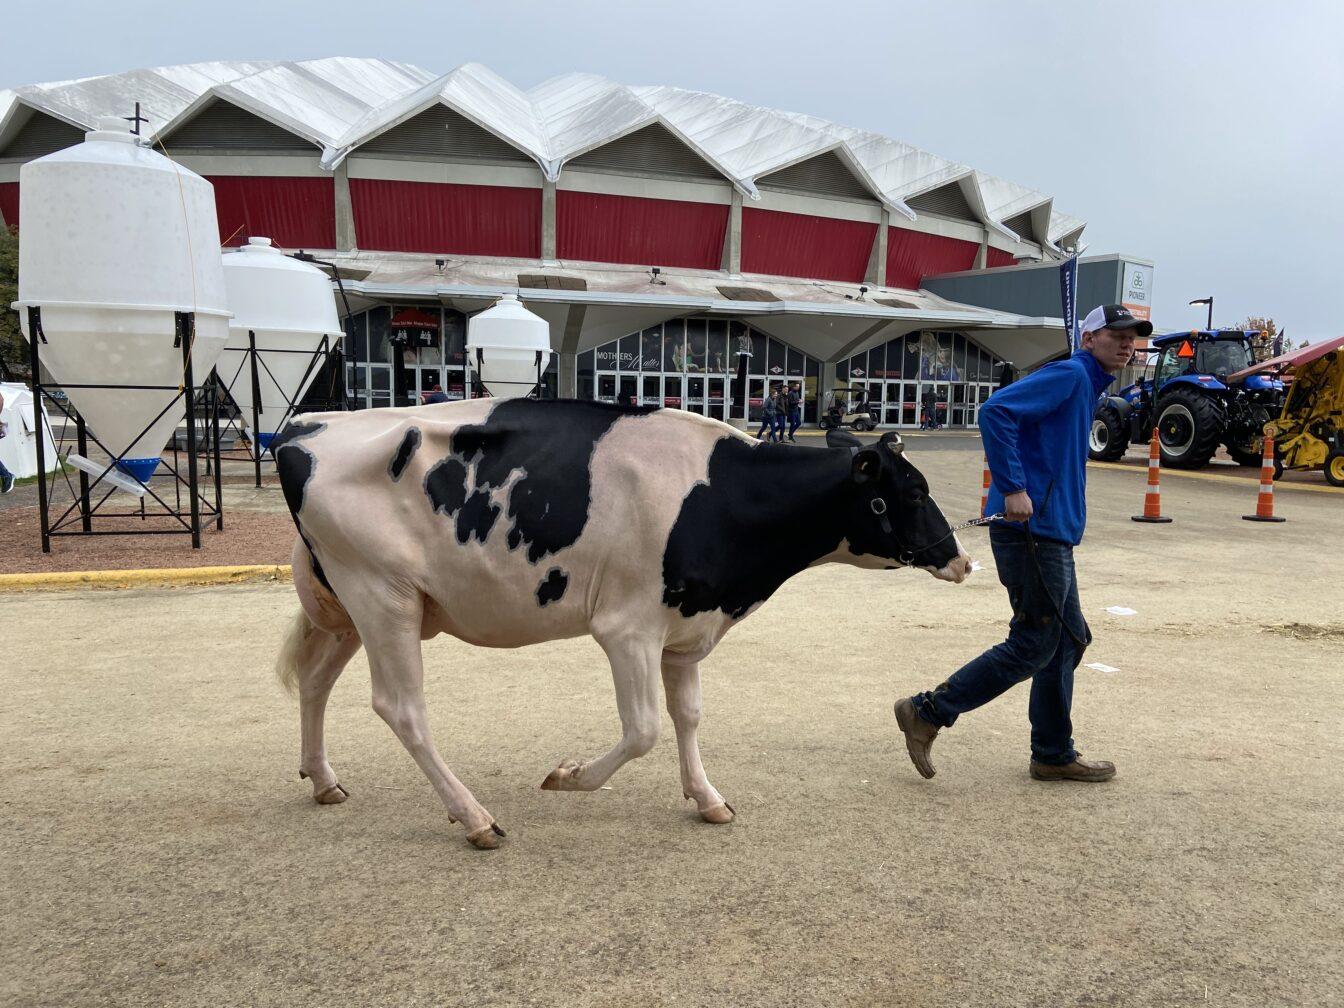 Madison+hosts+56th+annual+World+Dairy+Expo